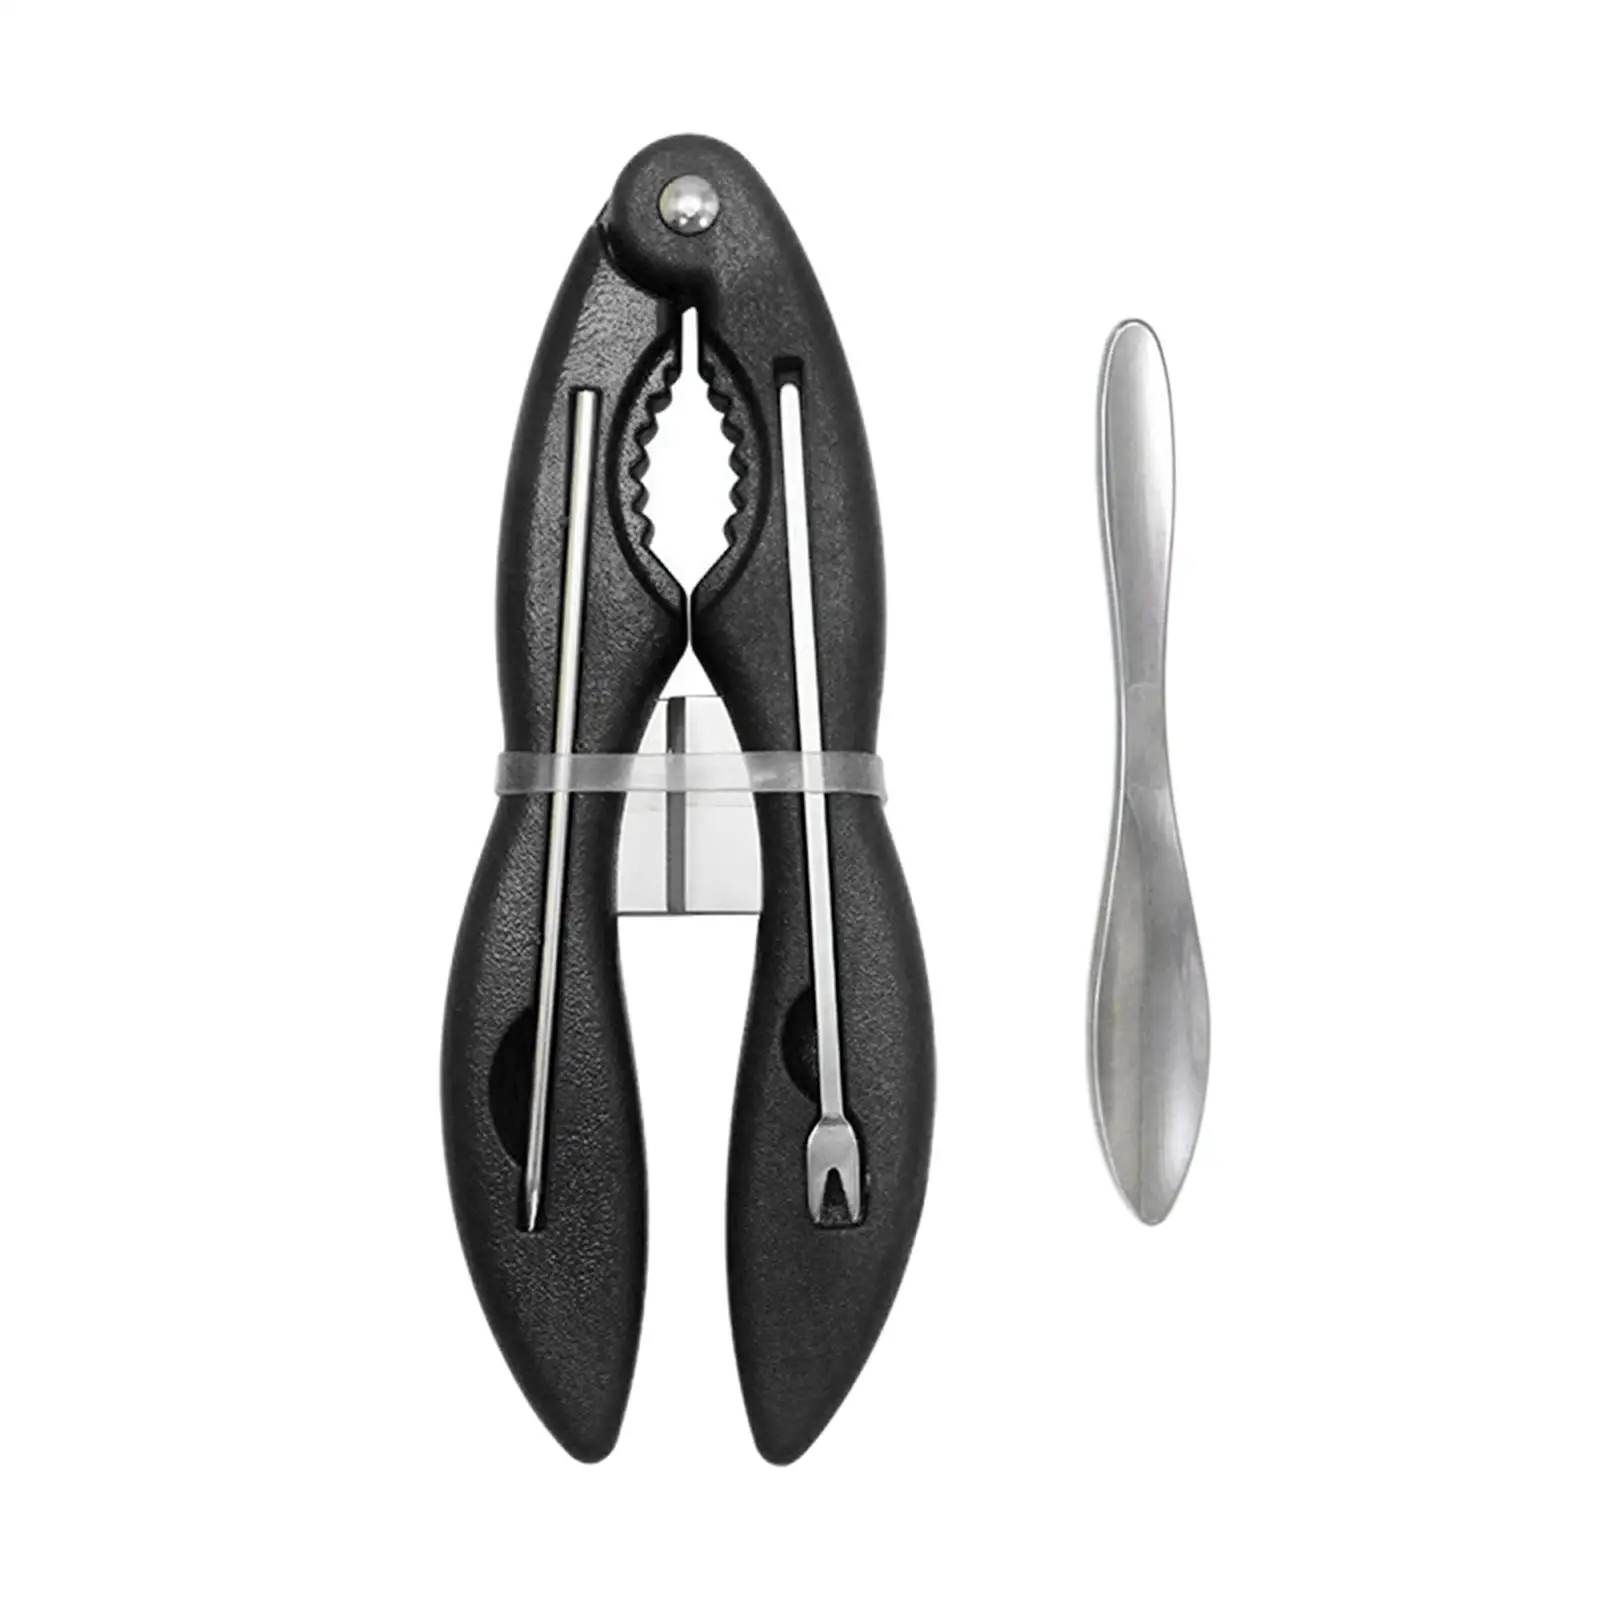 lovesports2019 Seafood Tool Kitchen Accessories Nut Opener Multifunctional for